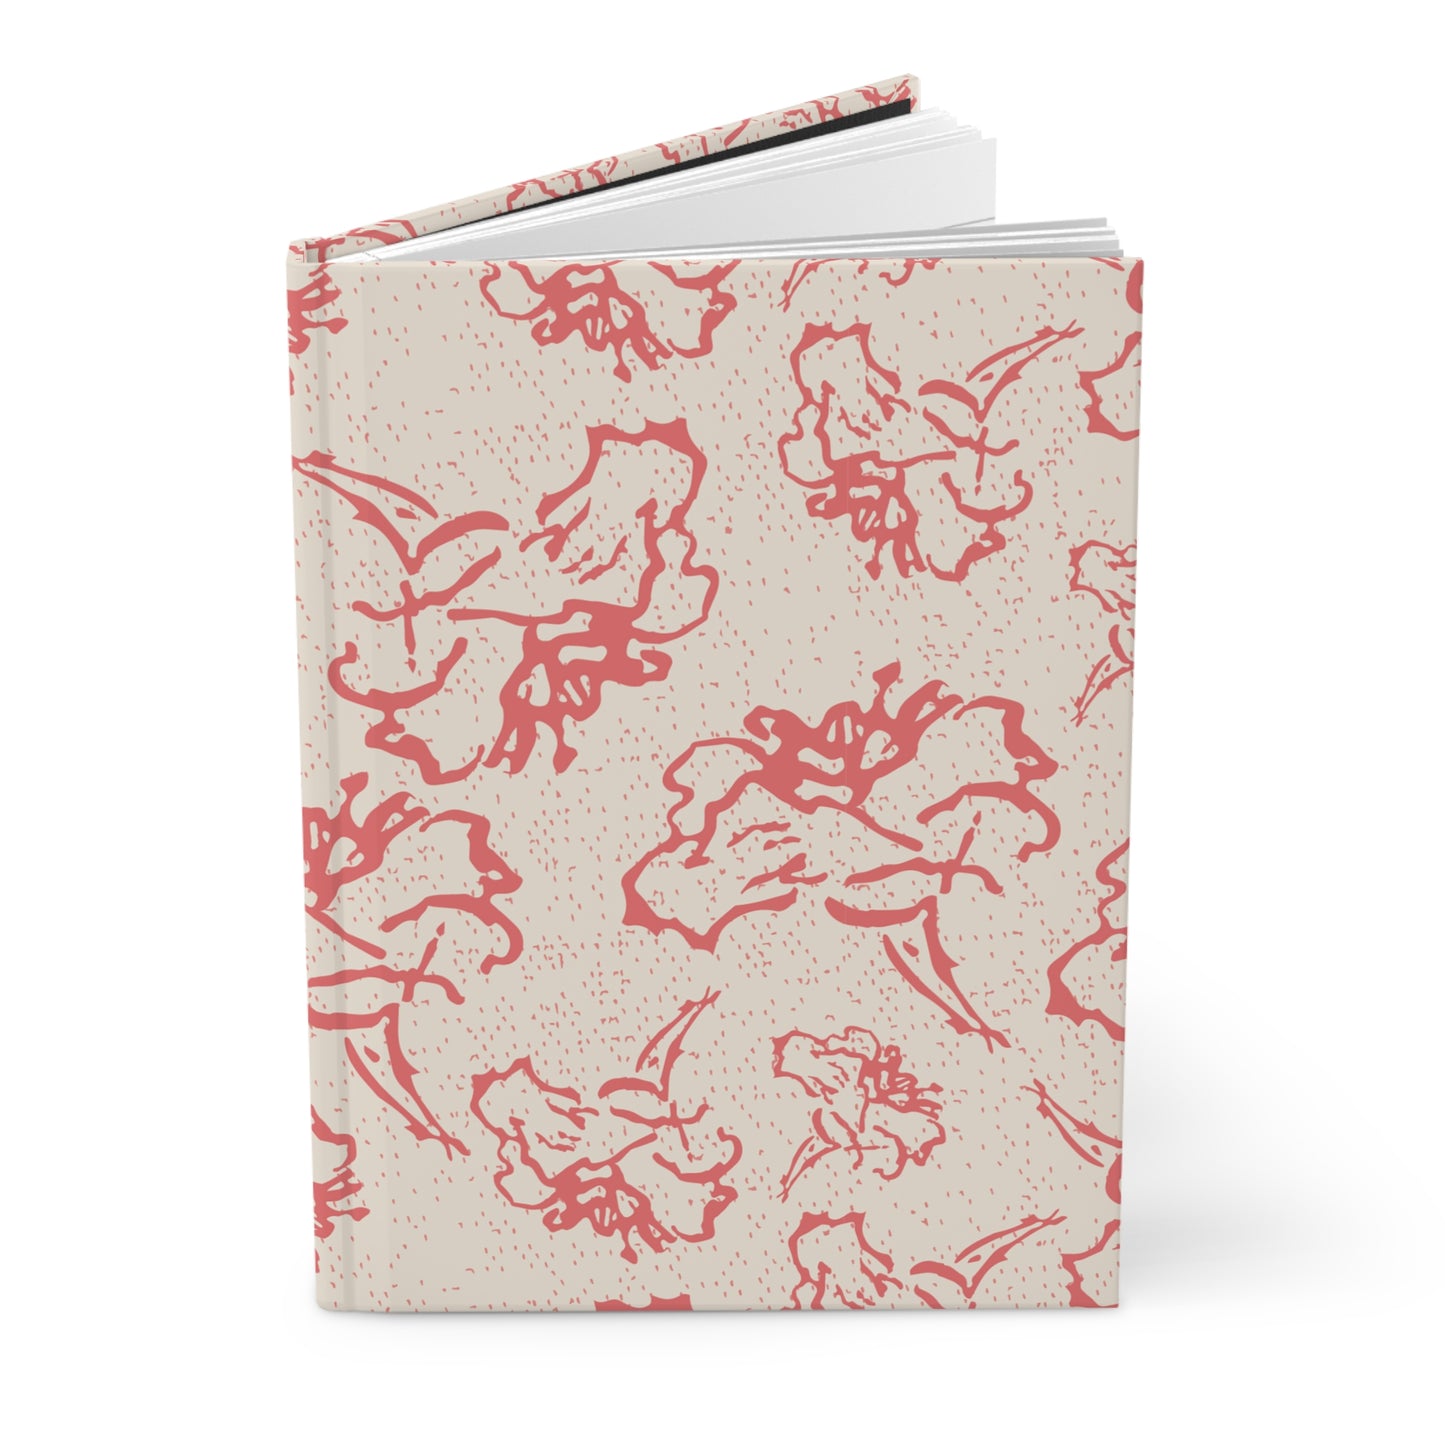 Fleeting Peach Flowers with a Cream Background Hardcover Journal Matte